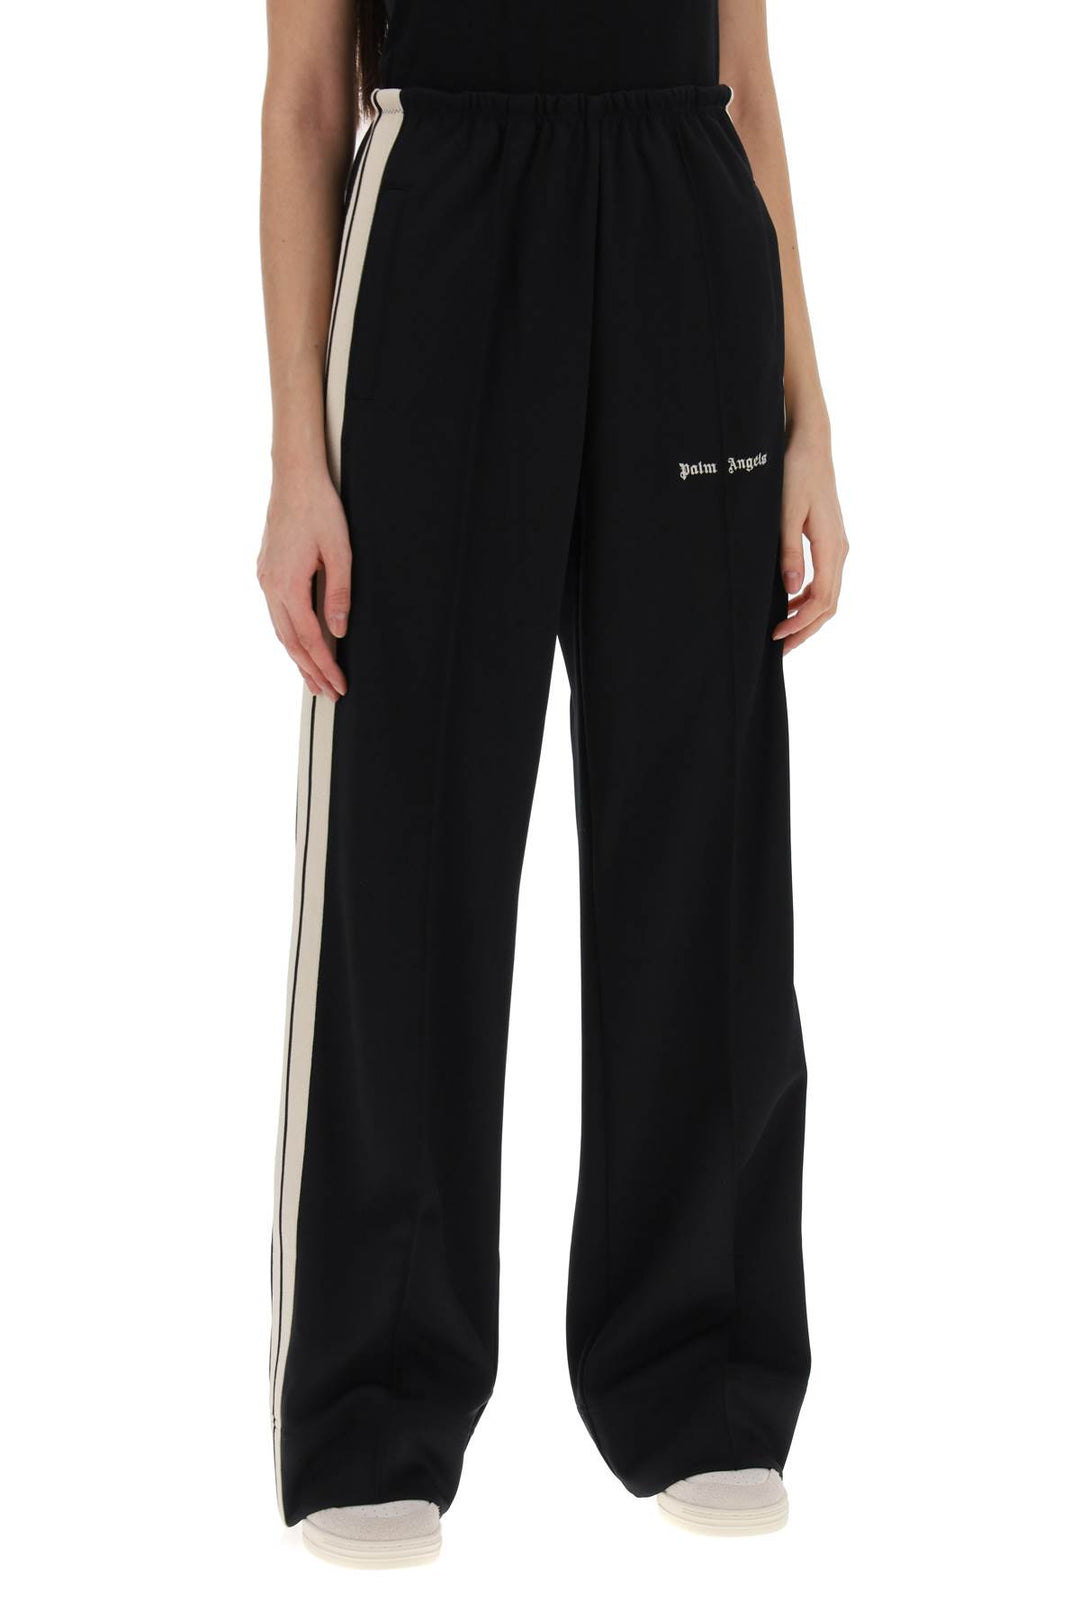 Palm angels track pants with contrast bands-1